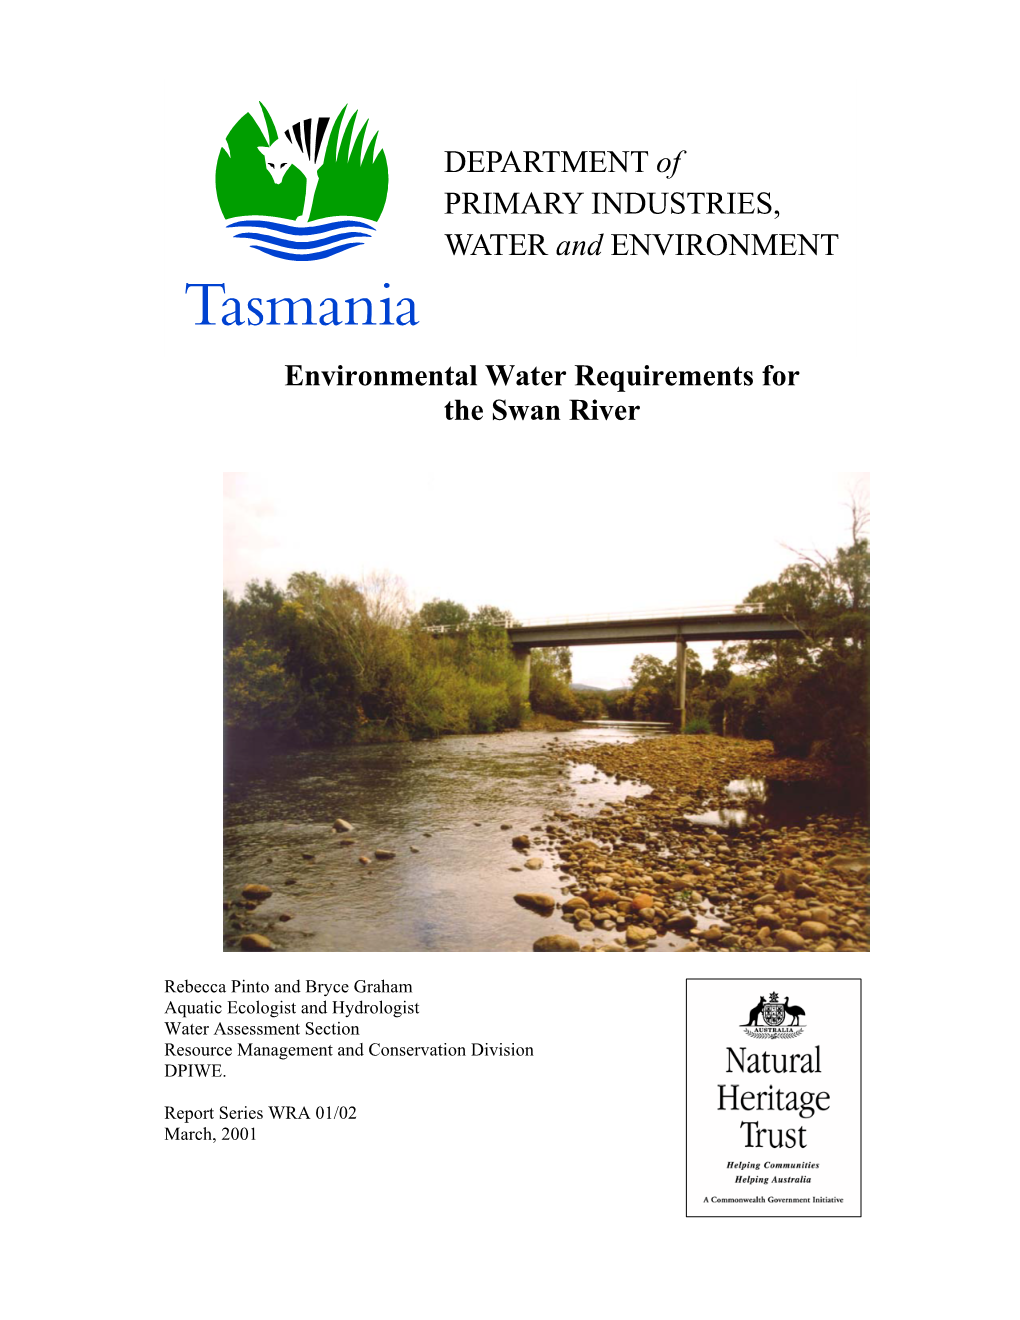 Environmental Water Requirements for the Swan River